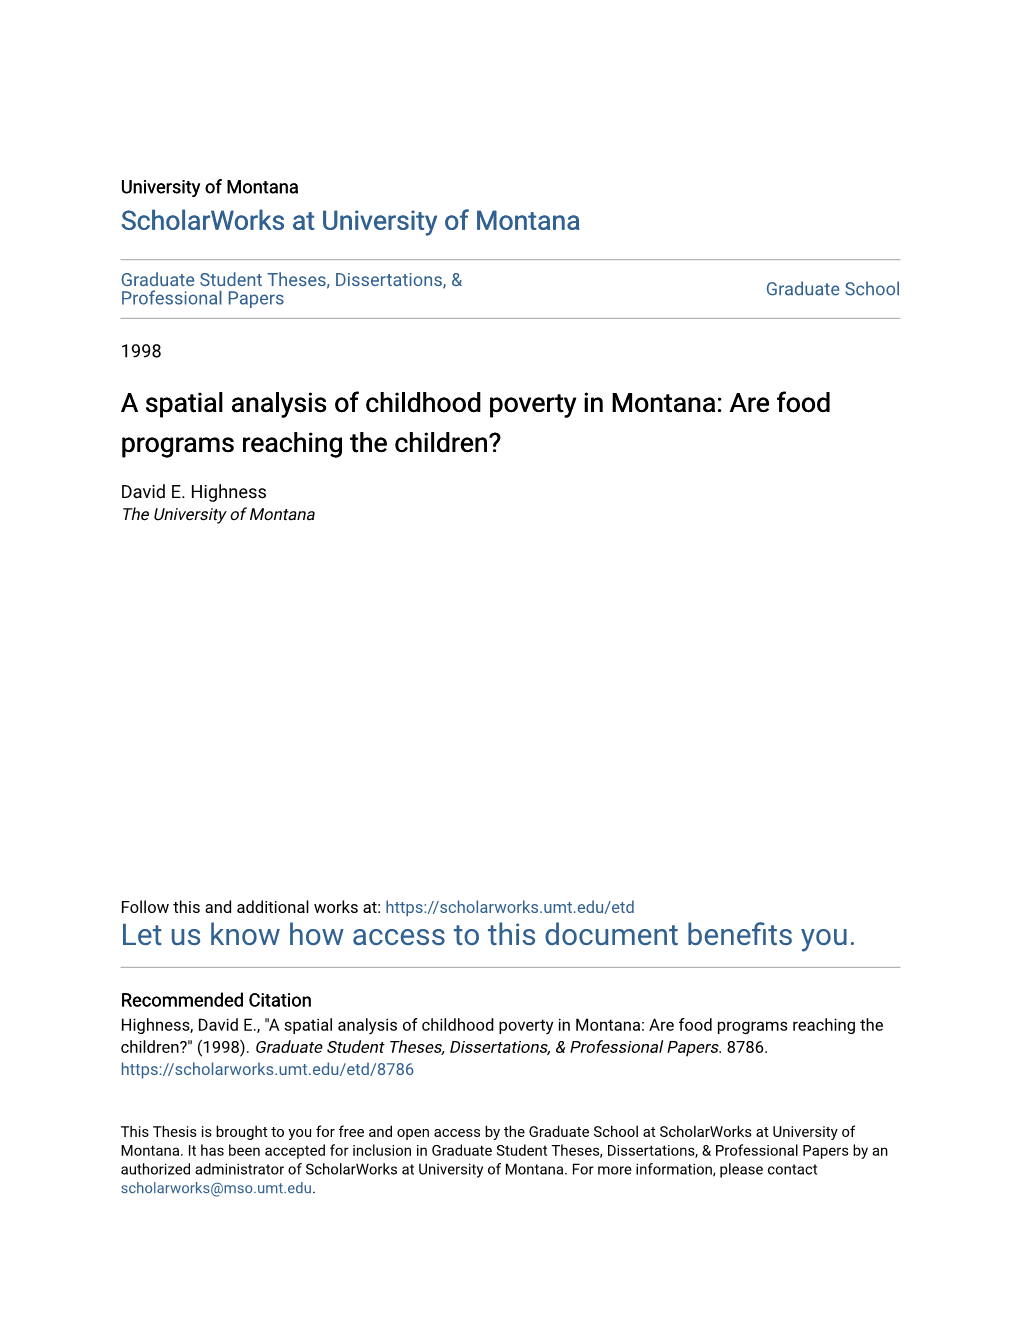 A Spatial Analysis of Childhood Poverty in Montana: Are Food Programs Reaching the Children?